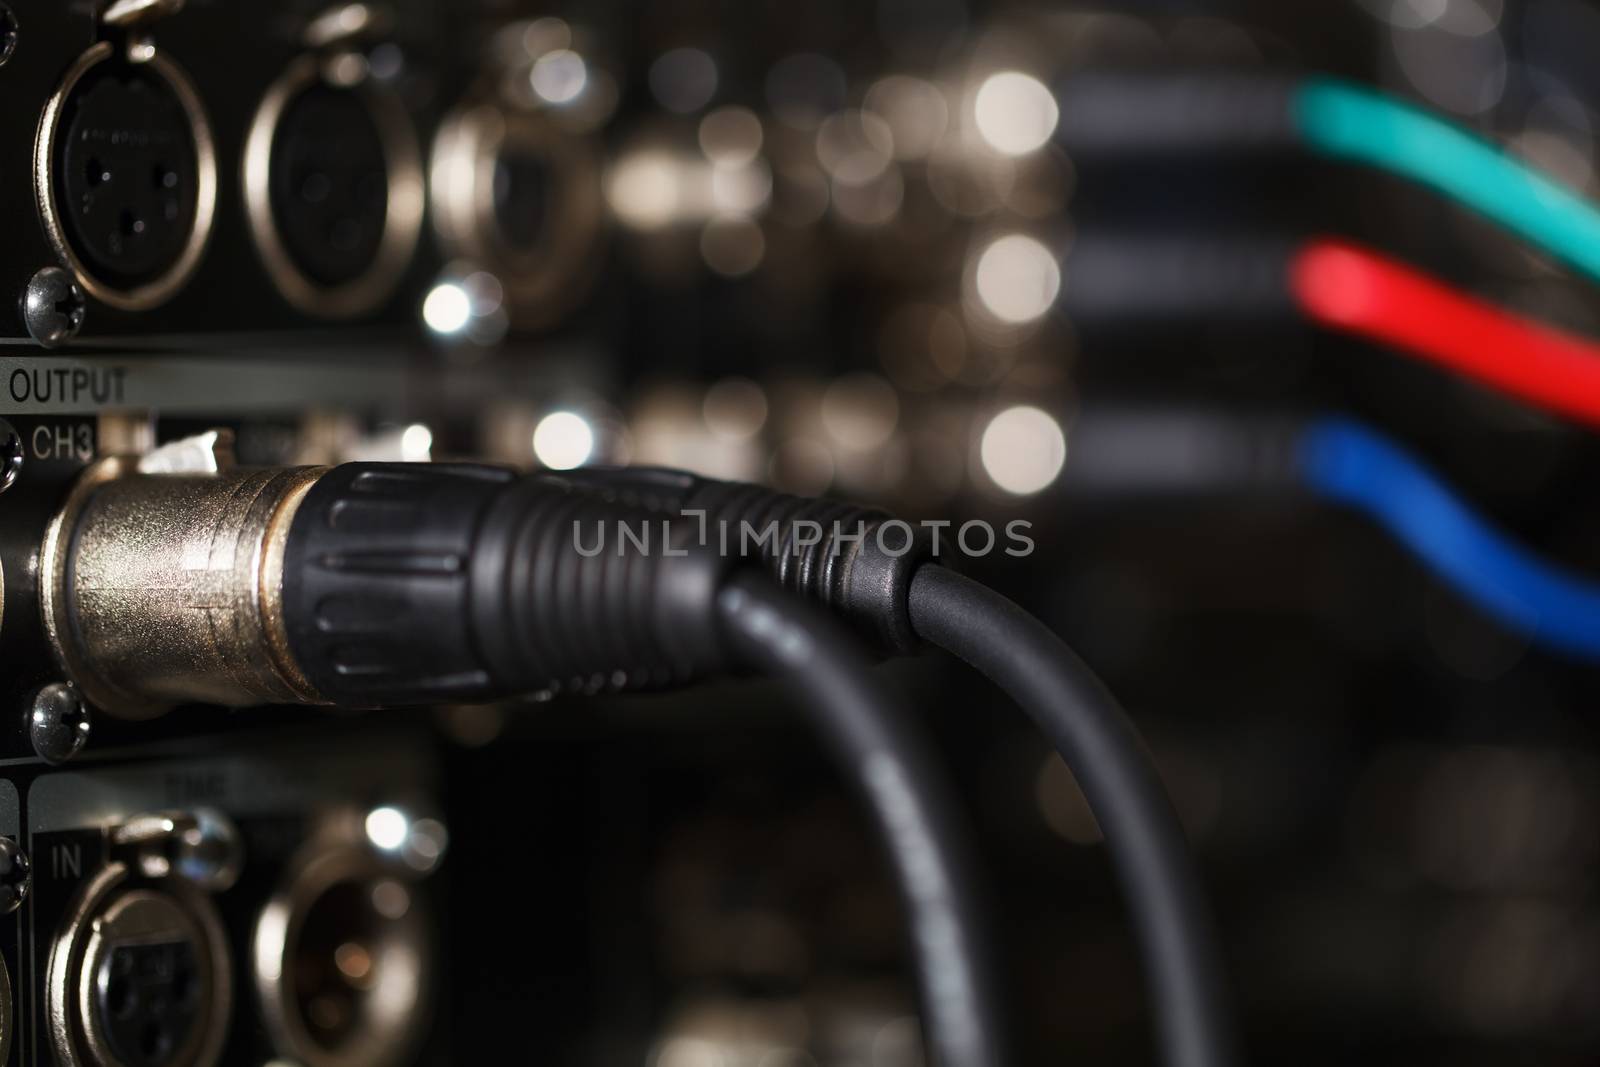 XLR audio digital cables in the rear panel of the professional VCR. RGB video cables in blur.